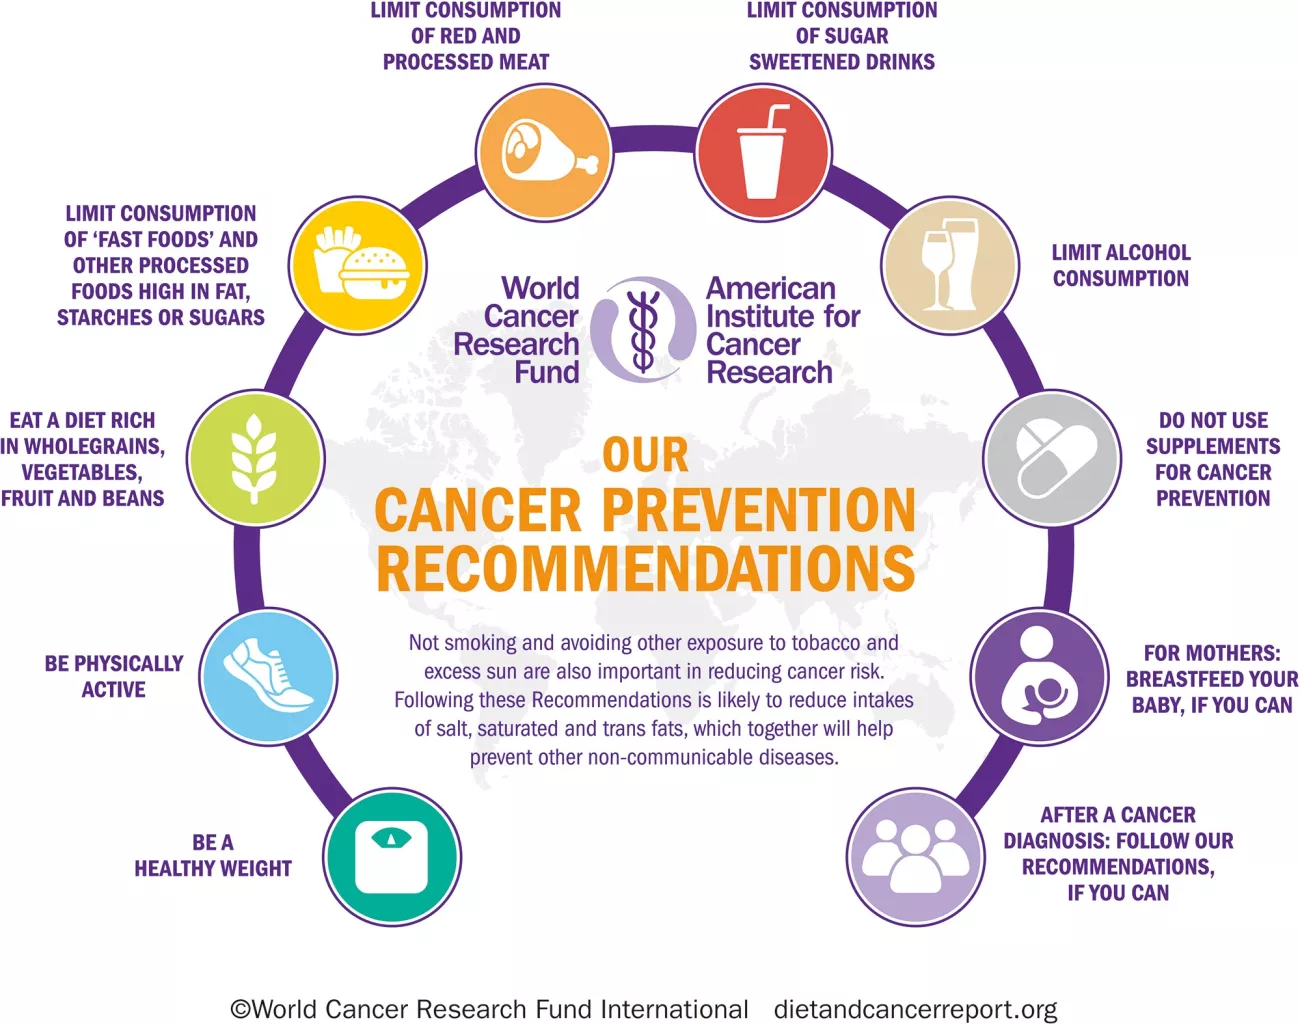 Summary of cancer prevention recommendations from World Cancer Research Fund